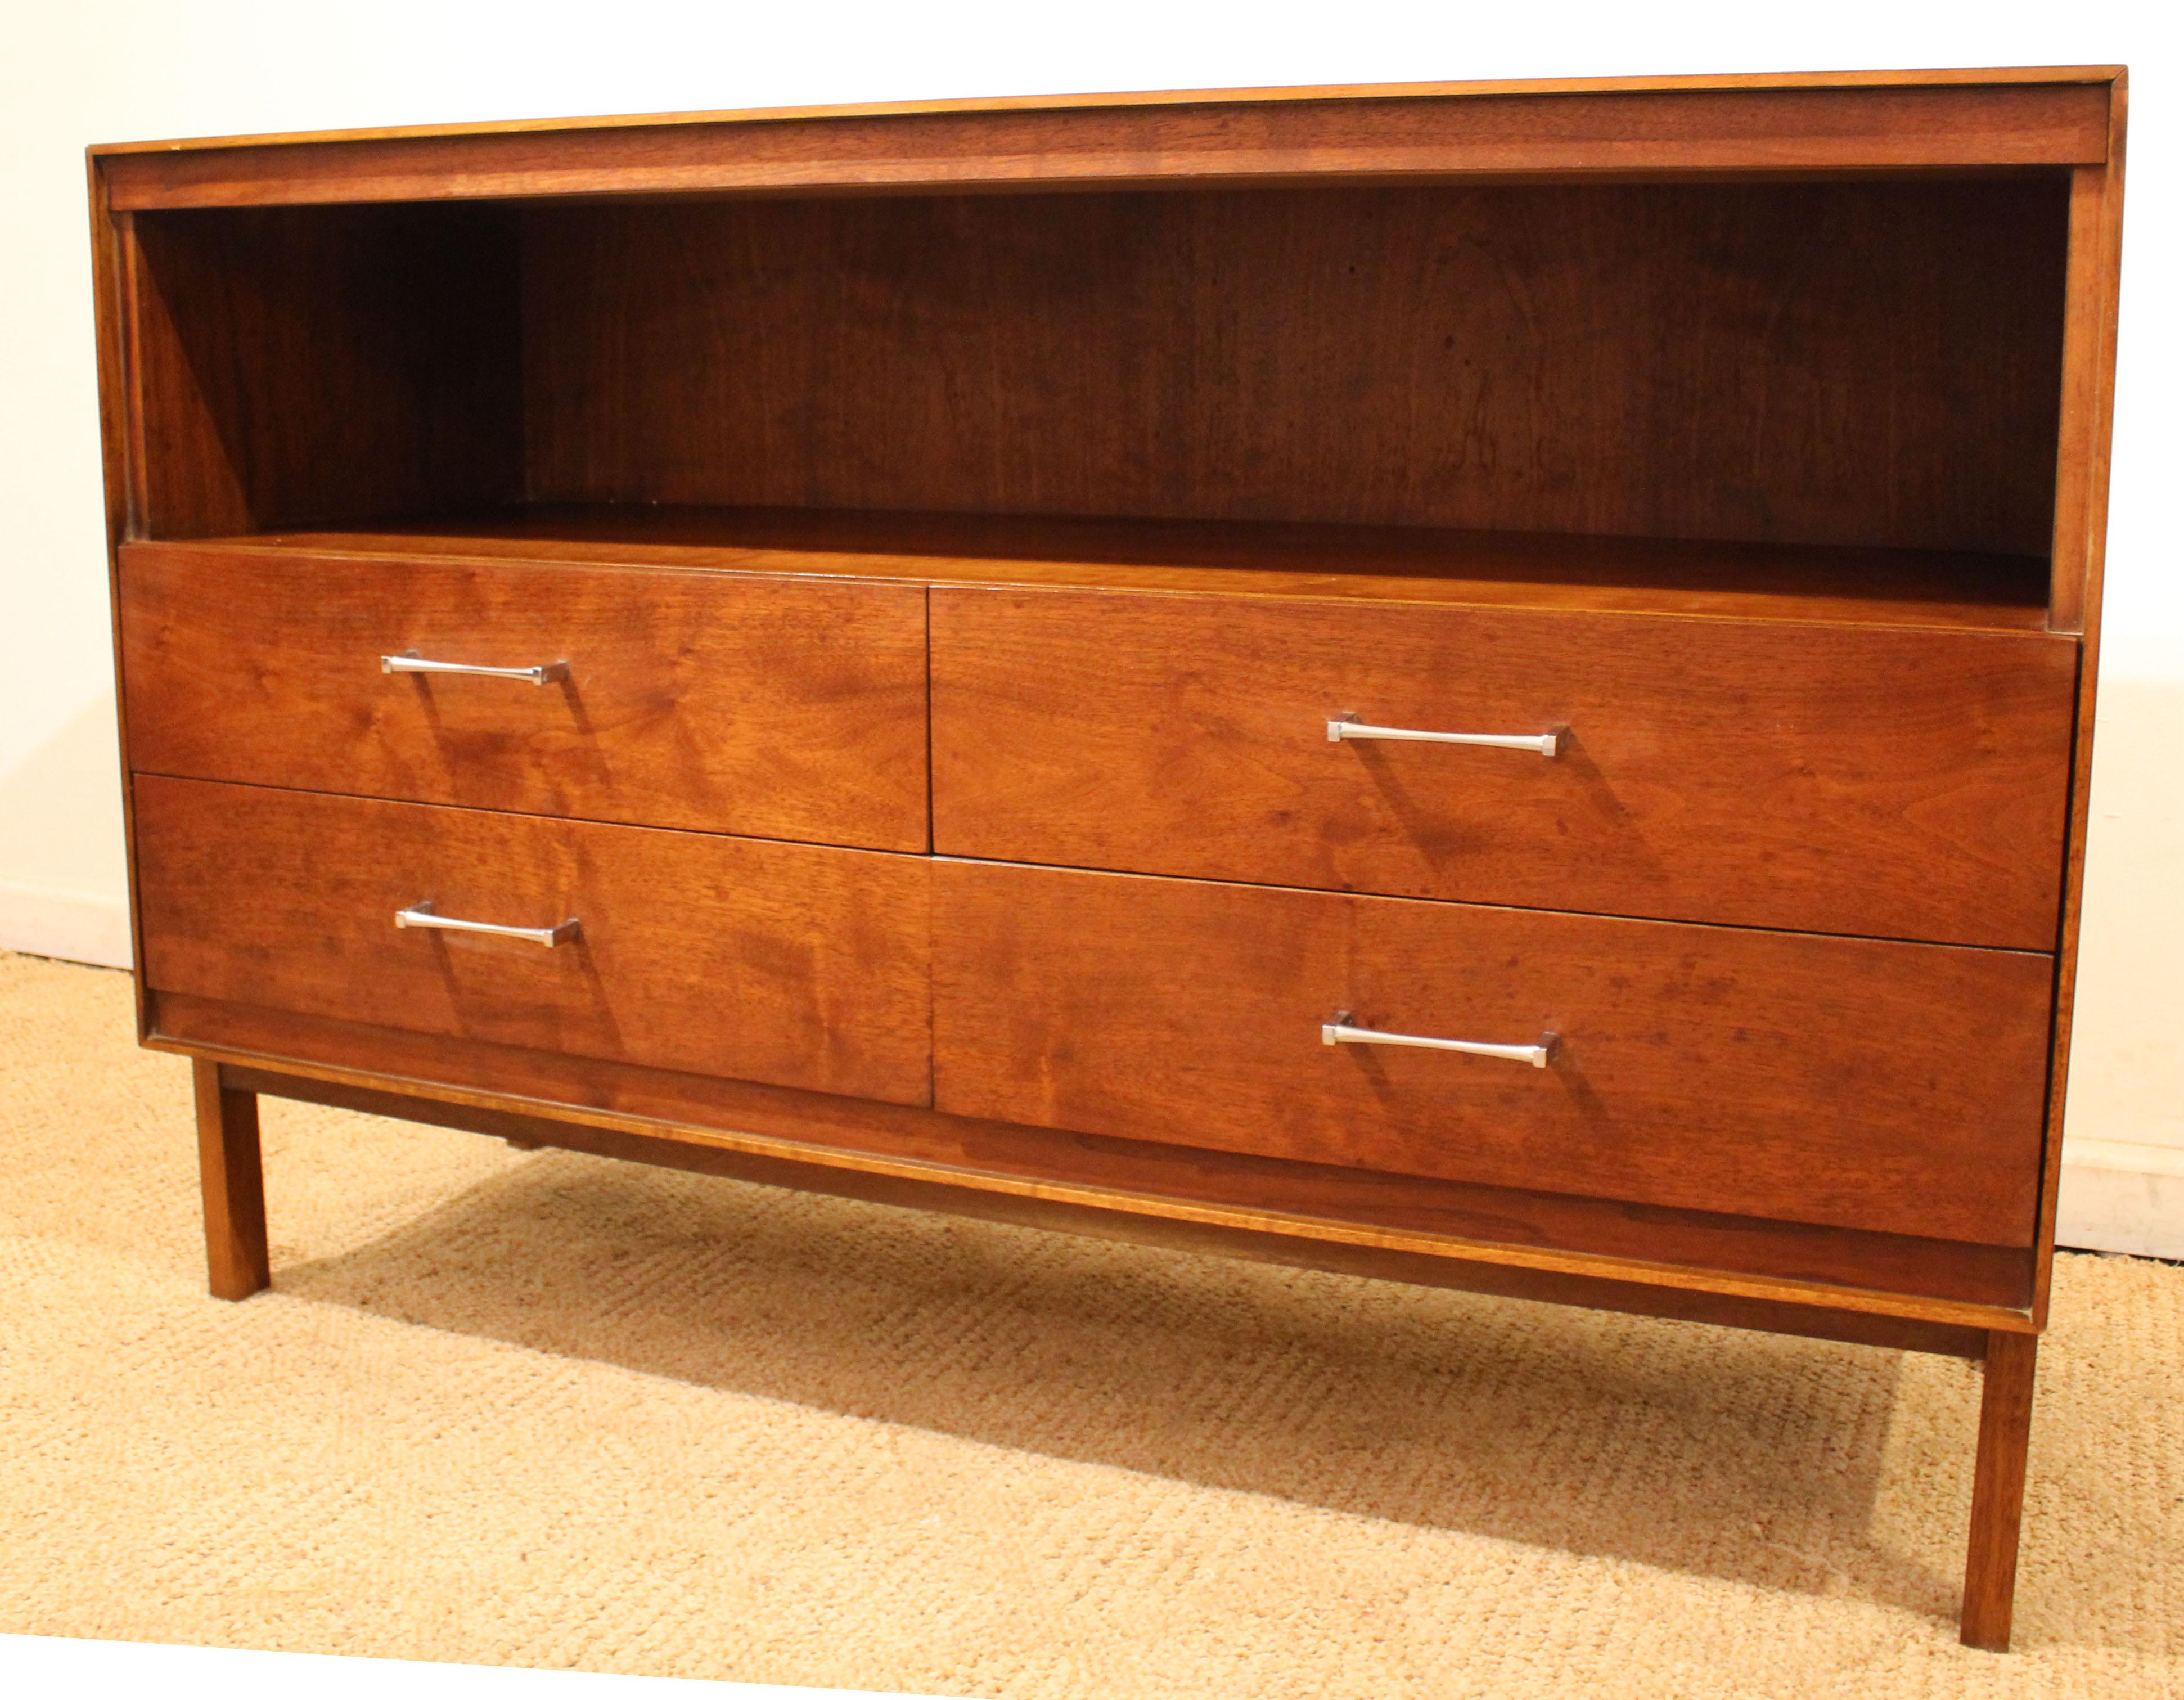 Offered is a Mid-Century Modern credenza, designed by Paul McCobb for Lane's 